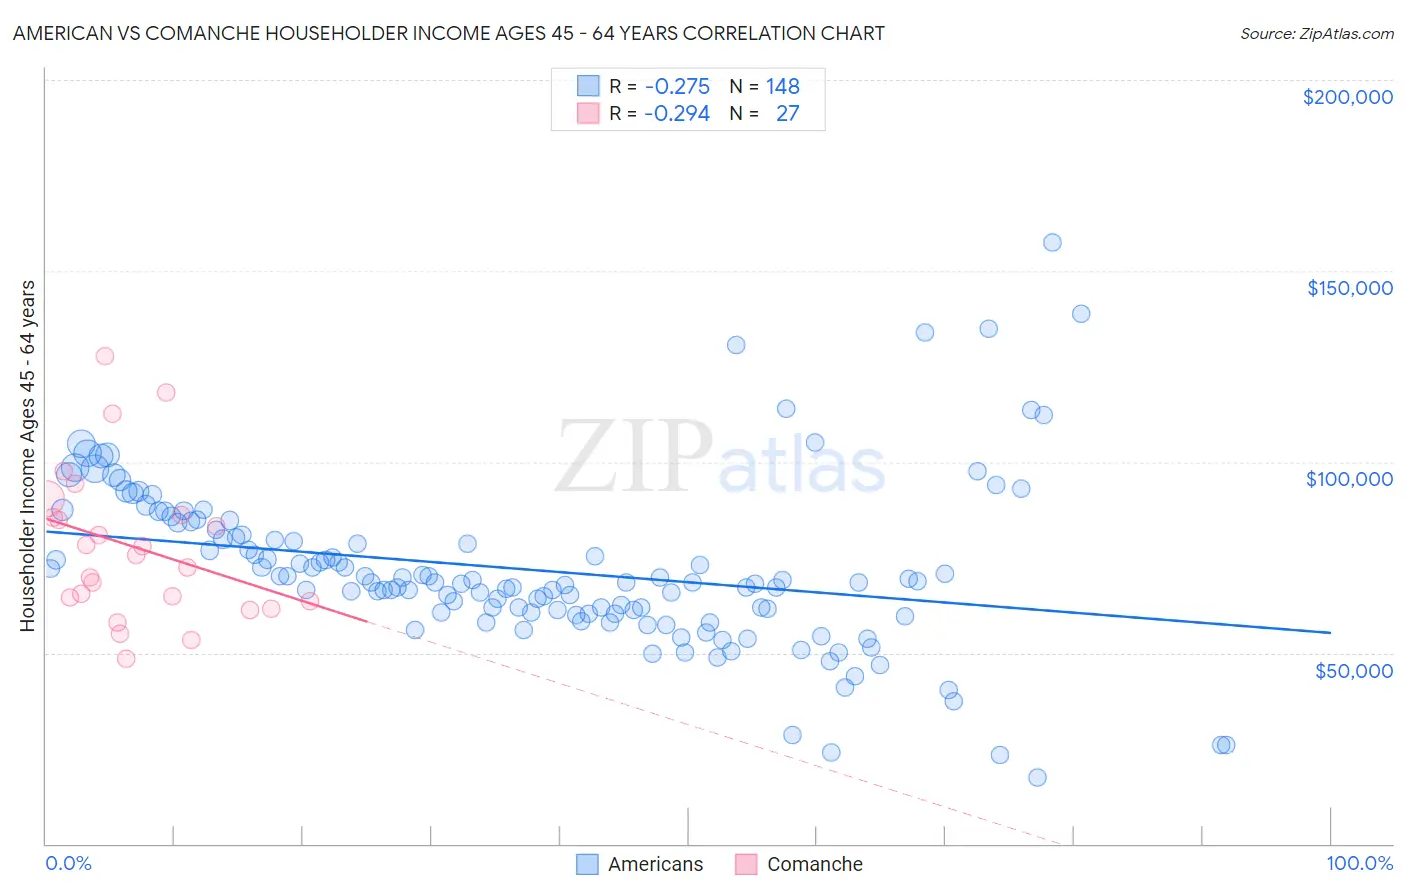 American vs Comanche Householder Income Ages 45 - 64 years